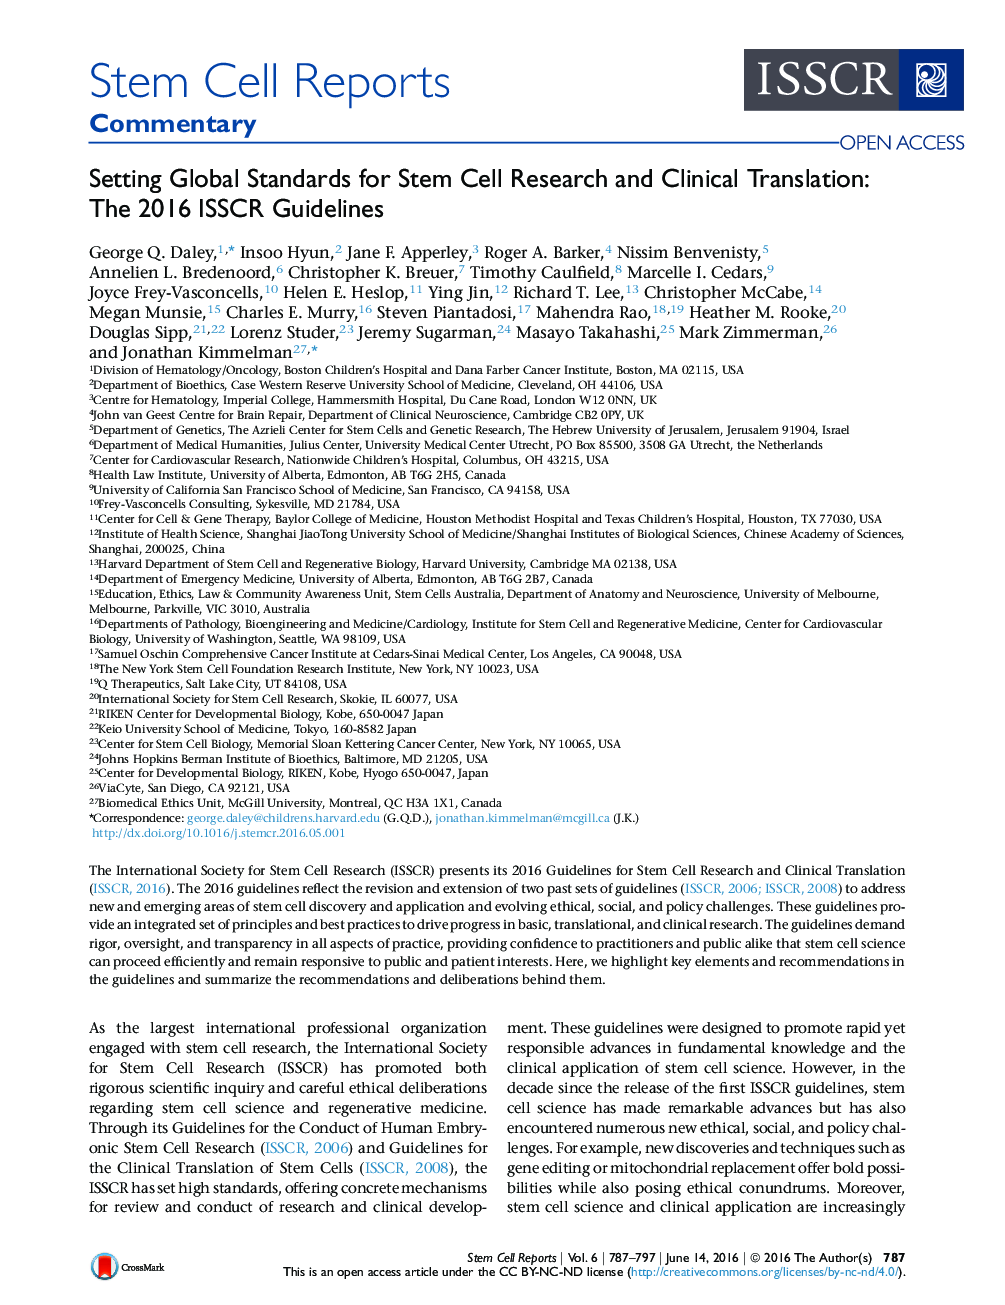 Setting Global Standards for Stem Cell Research and Clinical Translation: The 2016 ISSCR Guidelines